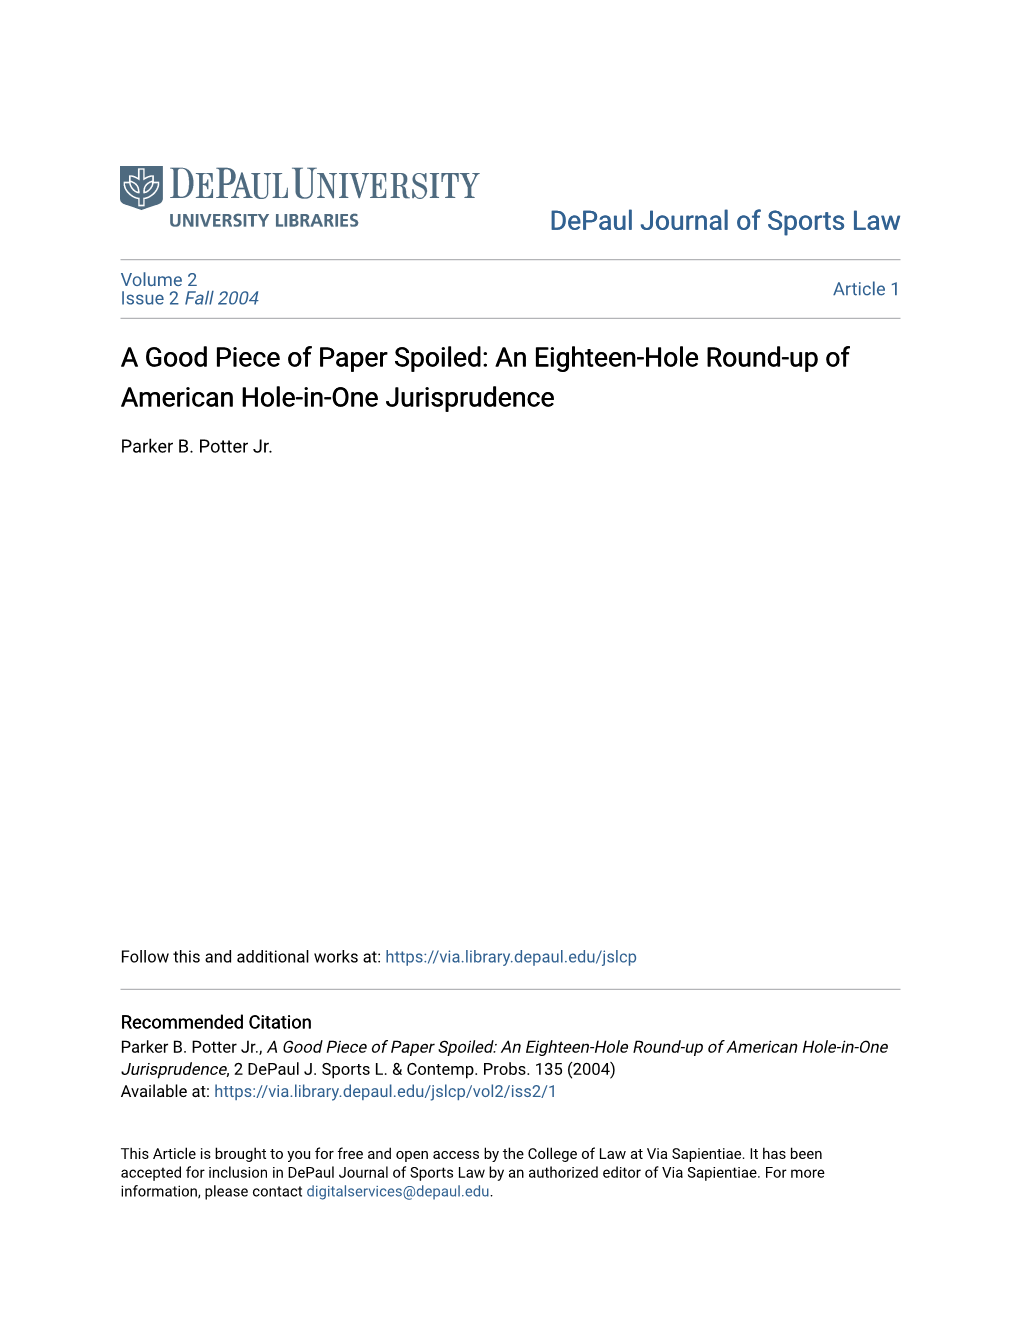 A Good Piece of Paper Spoiled: an Eighteen-Hole Round-Up of American Hole-In-One Jurisprudence